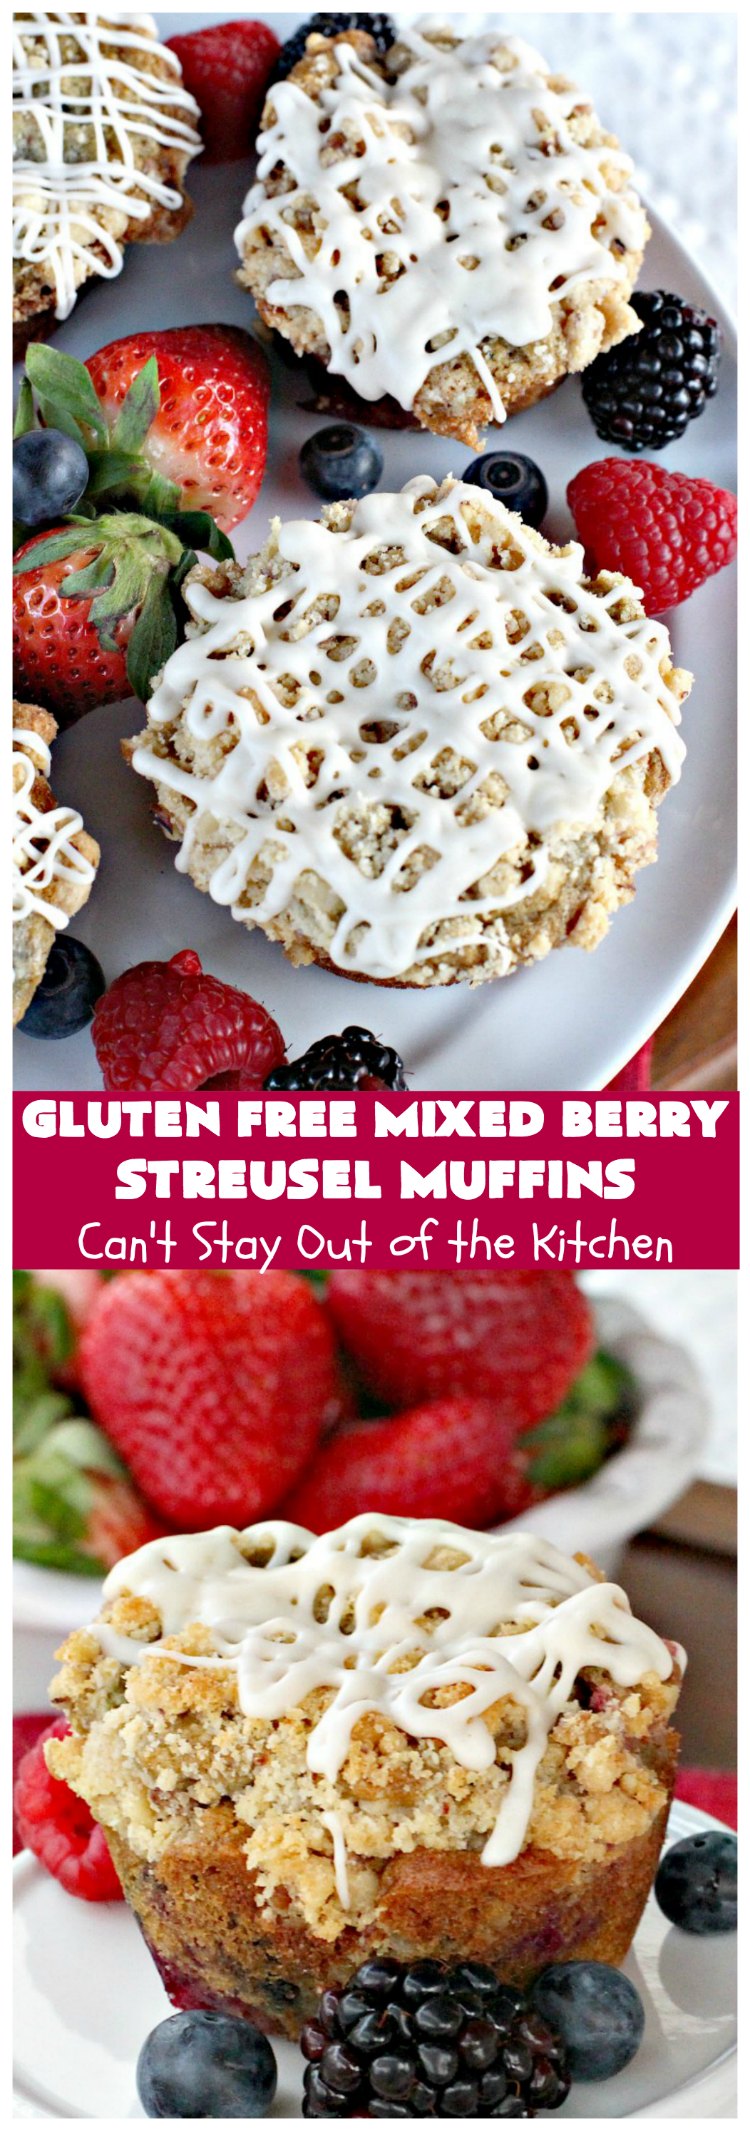 Gluten Free Mixed Berry Streusel Muffins | Can't Stay Out of the Kitchen